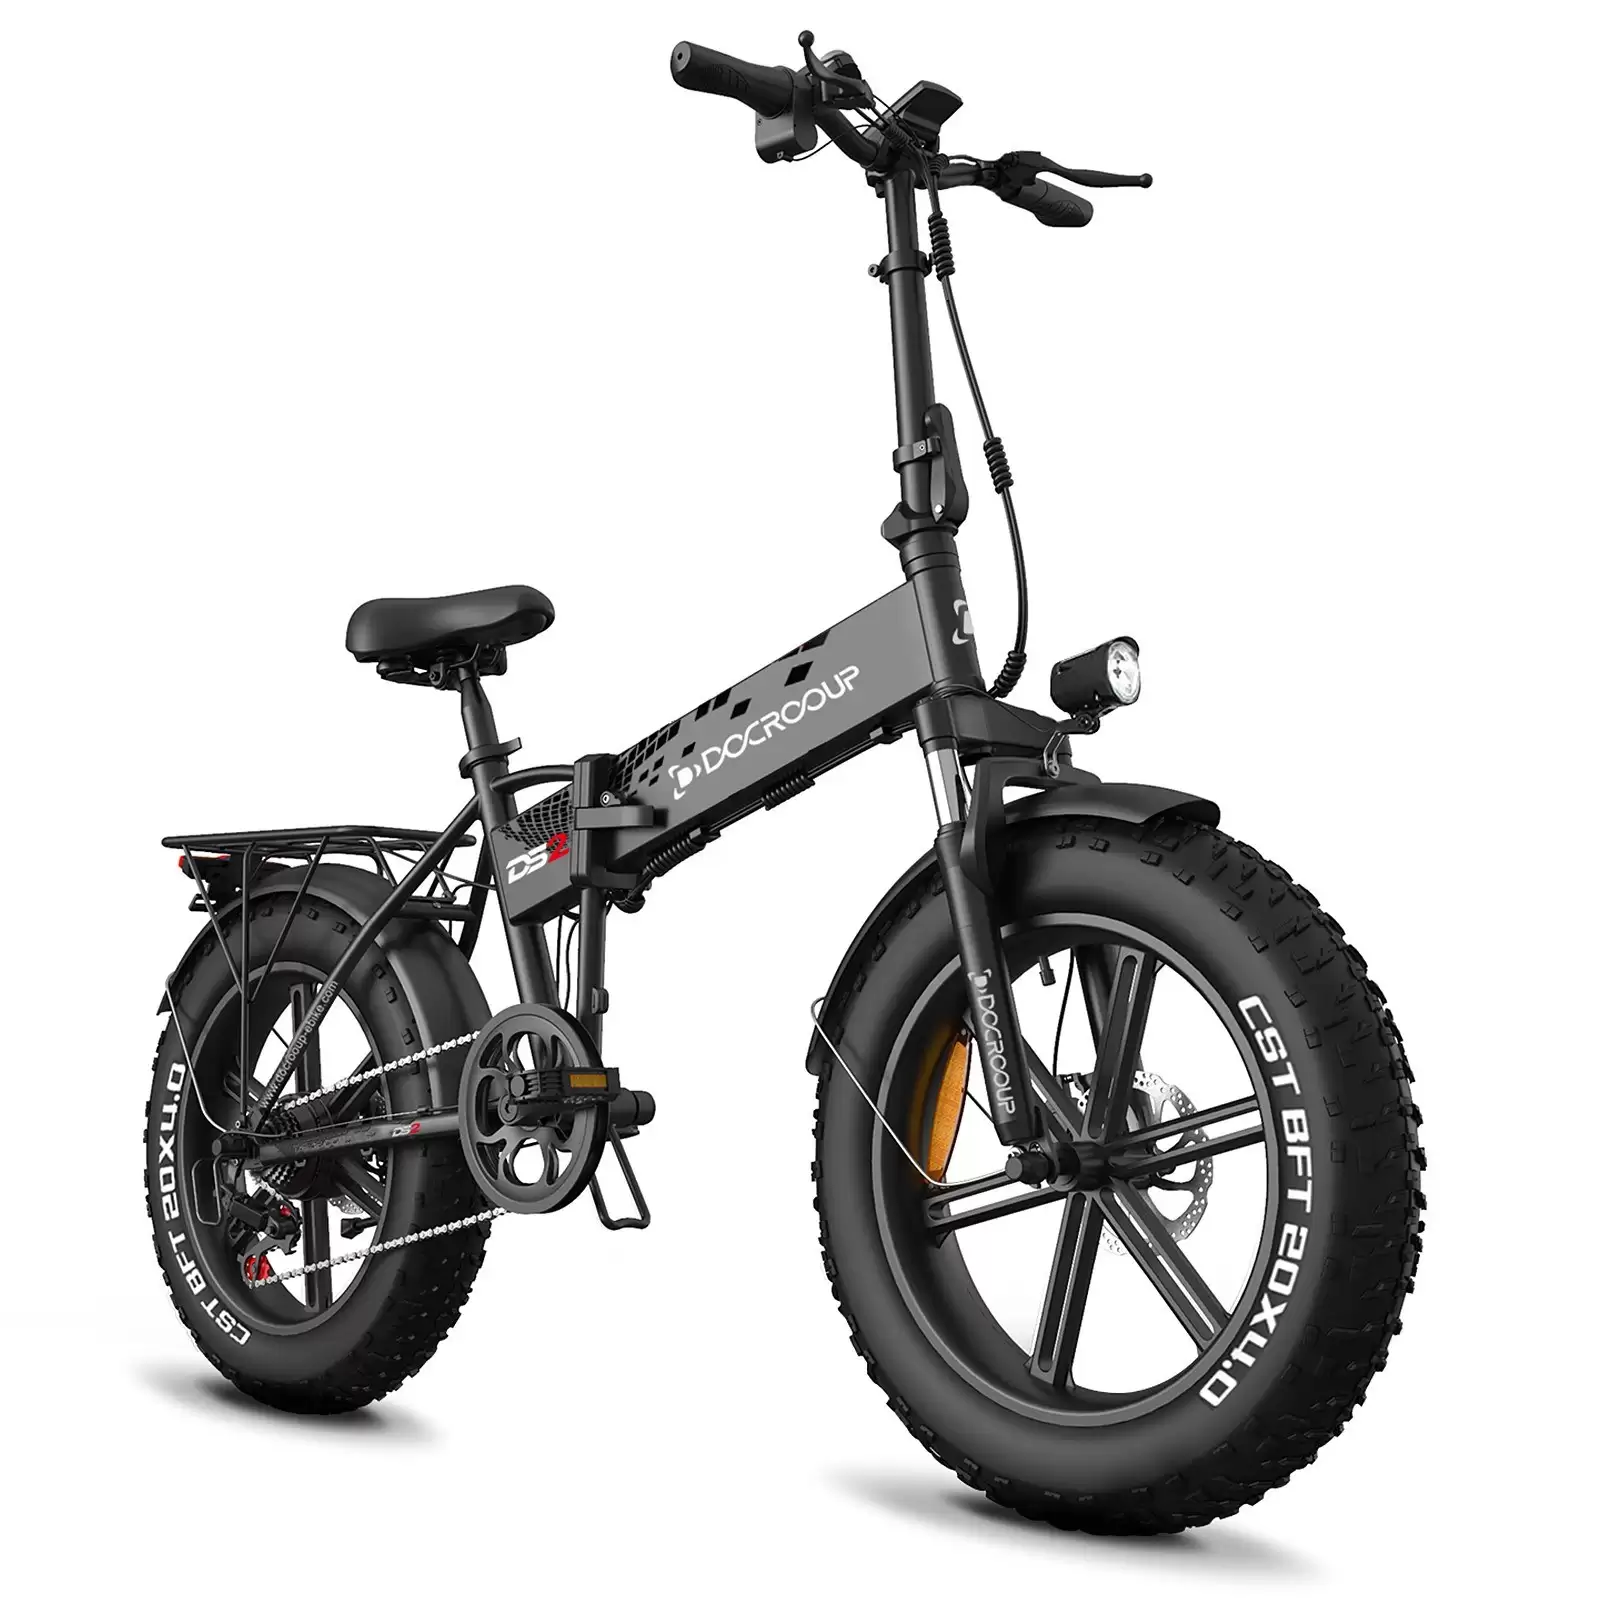 Order In Just $1209.99 [Us Warehouse] Docrooup 20inch Folding Electric Bike With Turn Signals Brake Light At Tomtop